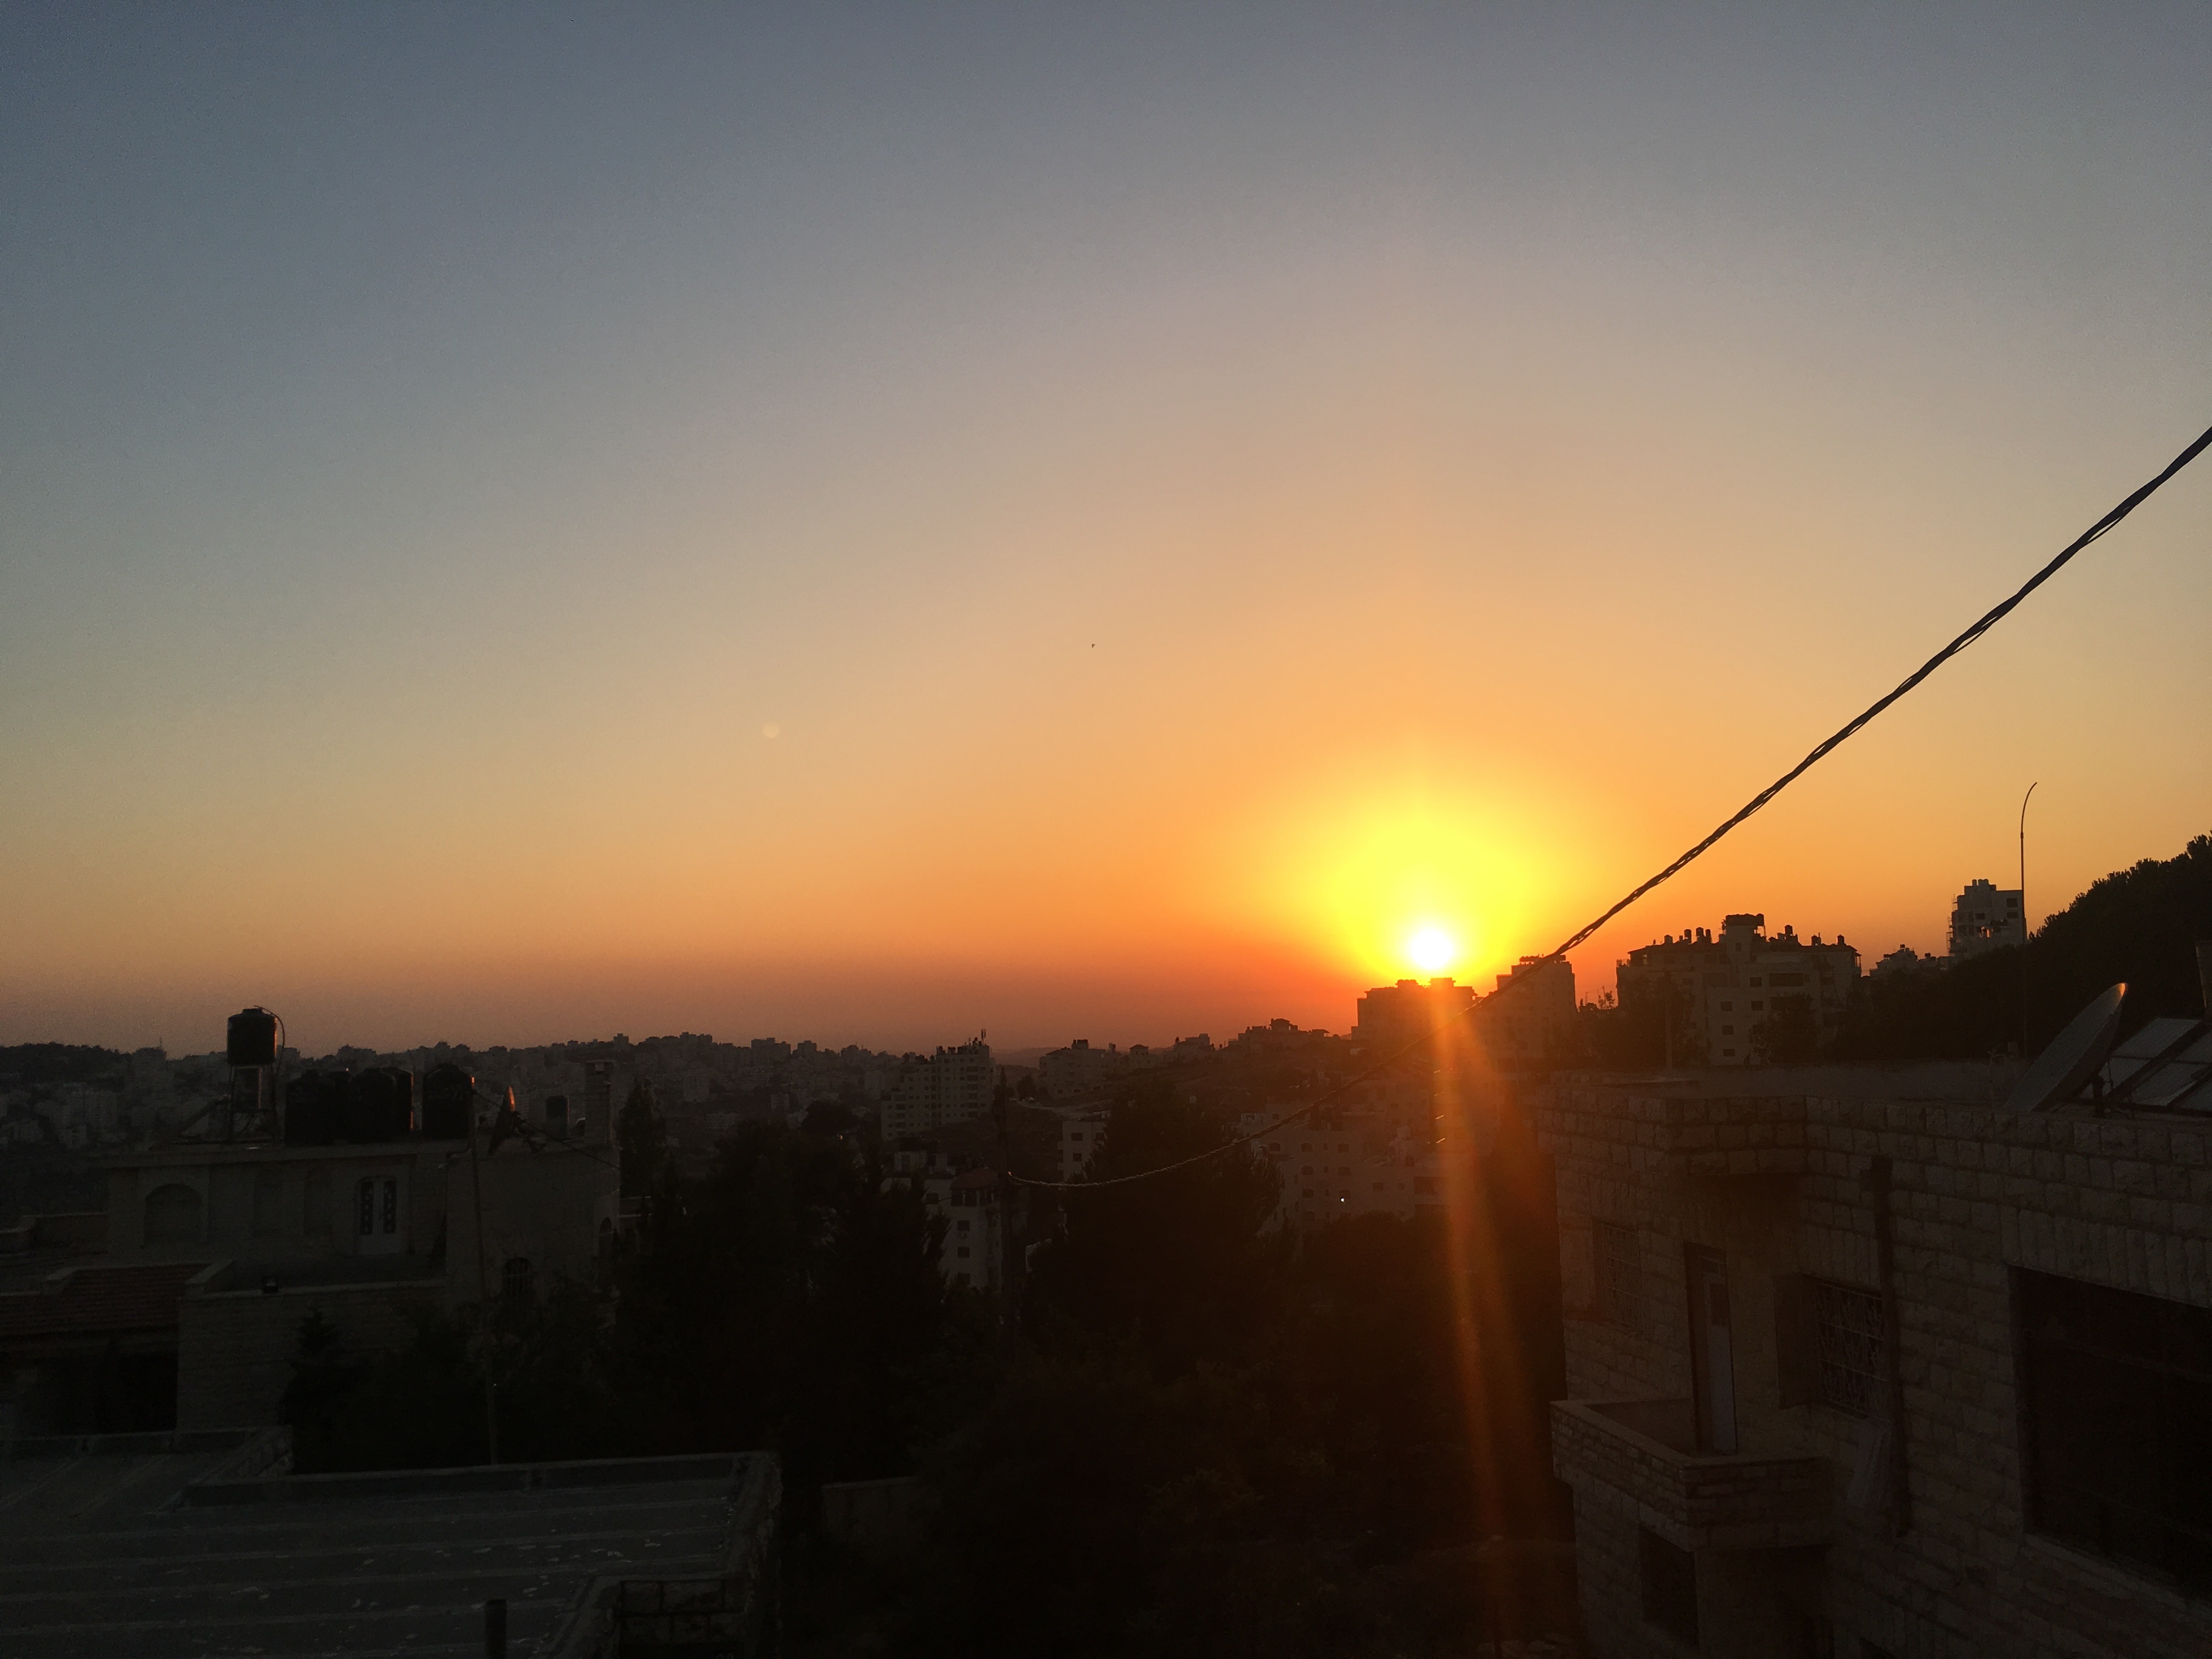 The sunset over the Palestinian city Ramallah, in the West Bank. Photo by Nesha Ruther. 